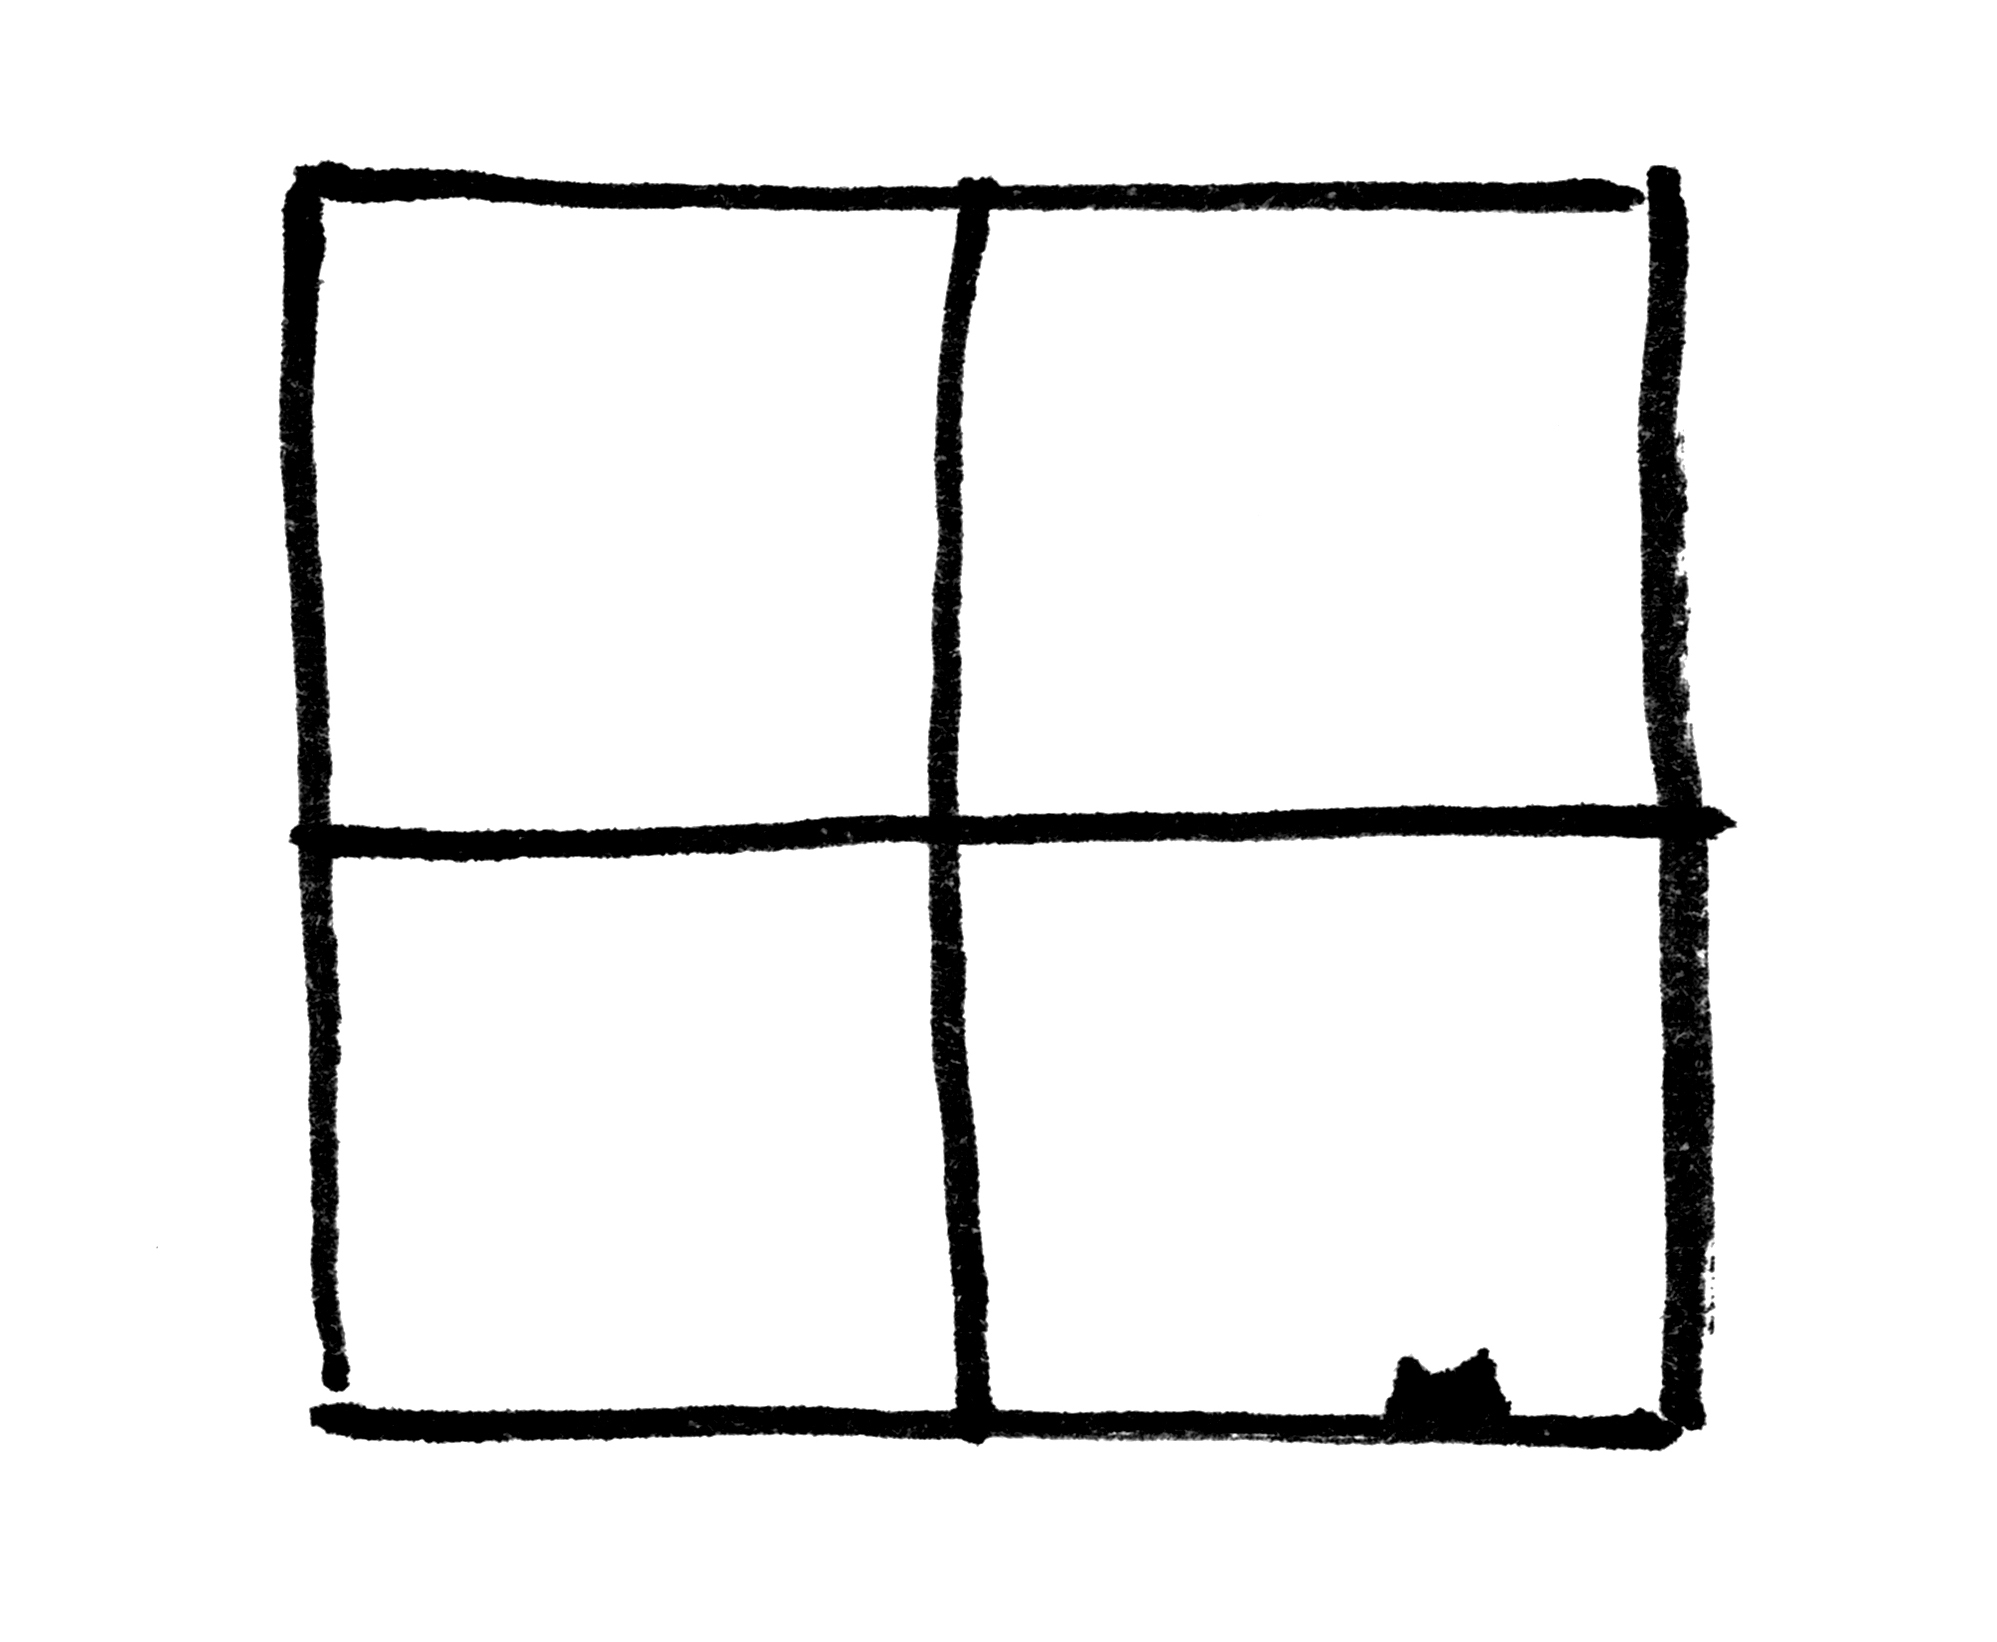 Illustration: a cat’s silhouette in a window